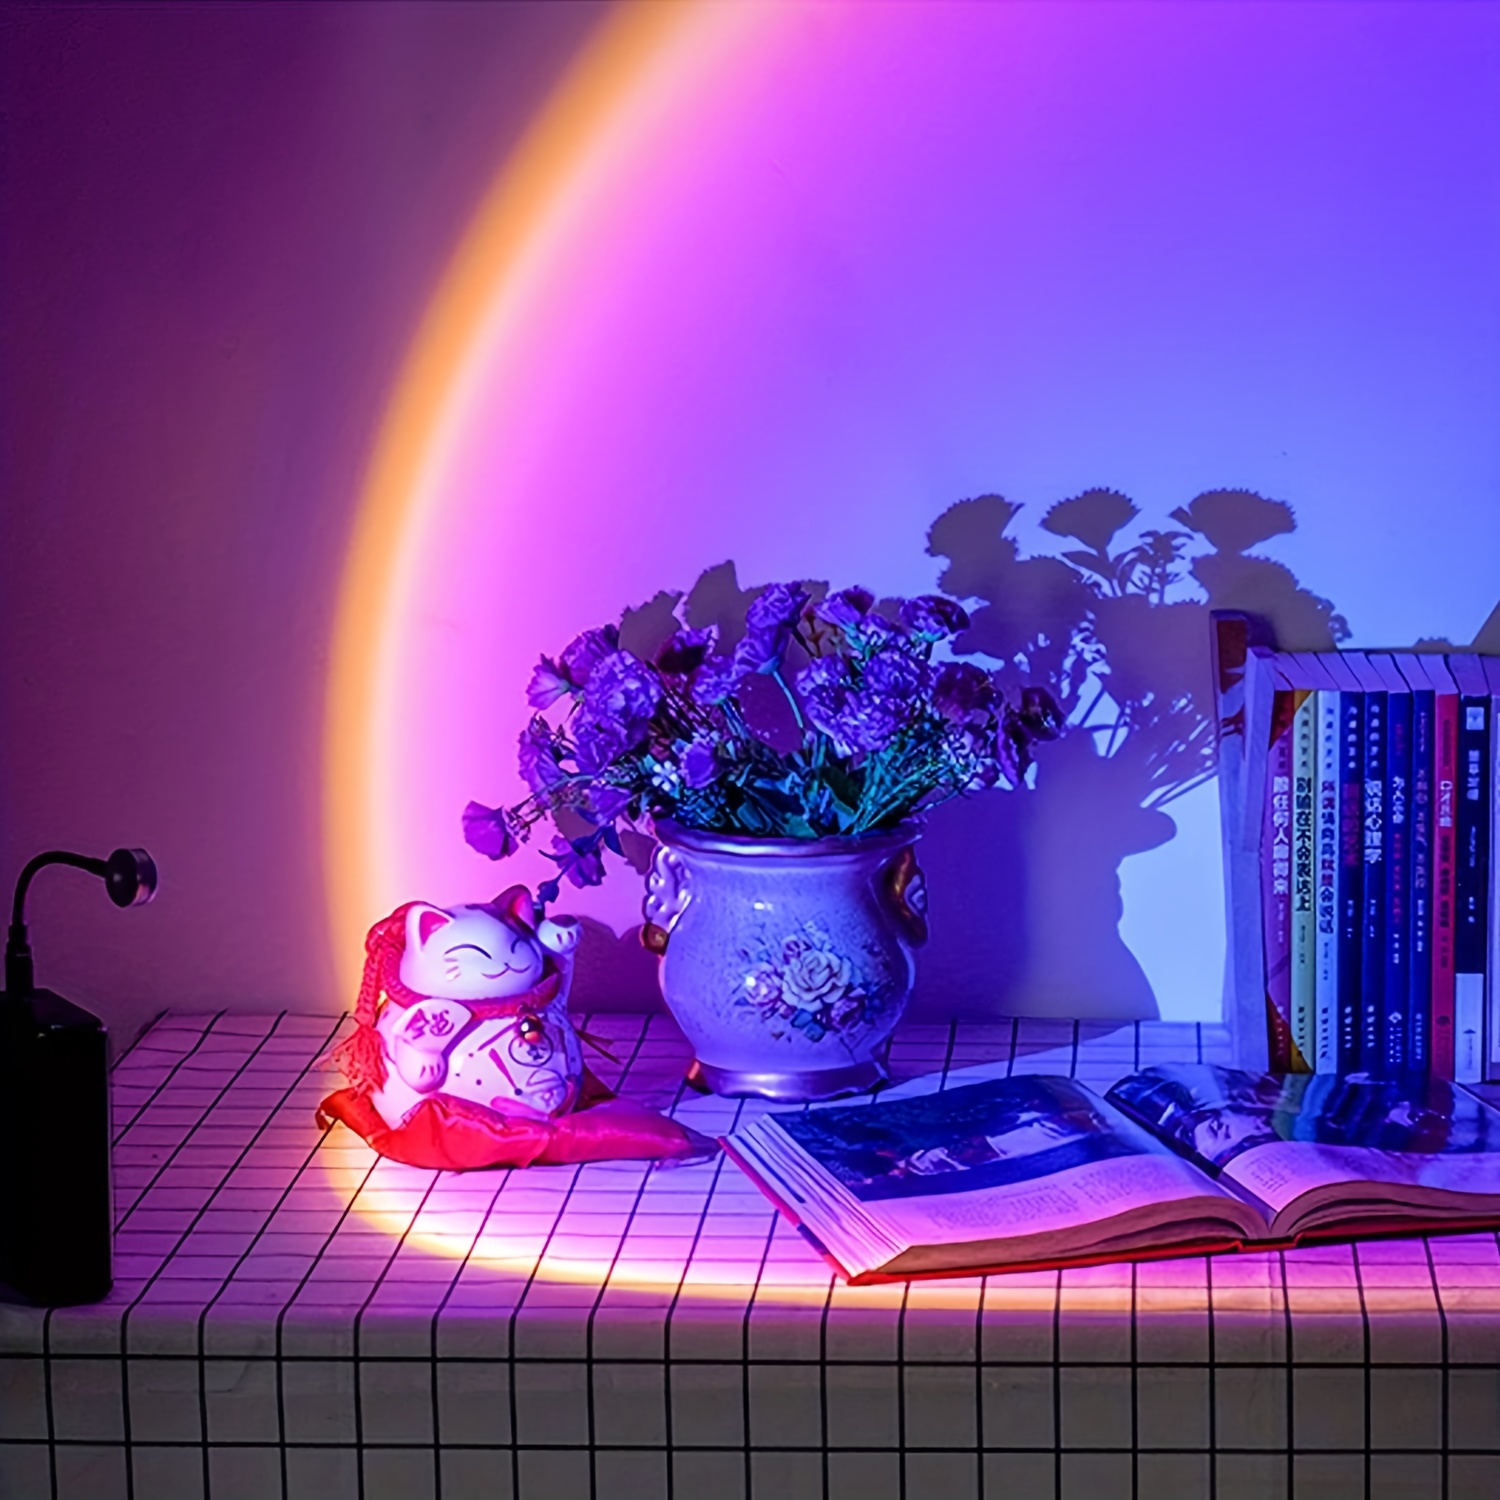 

Sunset Lamp Rainbow Multi-color Led Projection Lamp 360 Degree Rotating Sunset Lamp Usb Atmosphere Lamp Romantic Nightstand Lamp For Bedroom Photography Computer Home Improvement